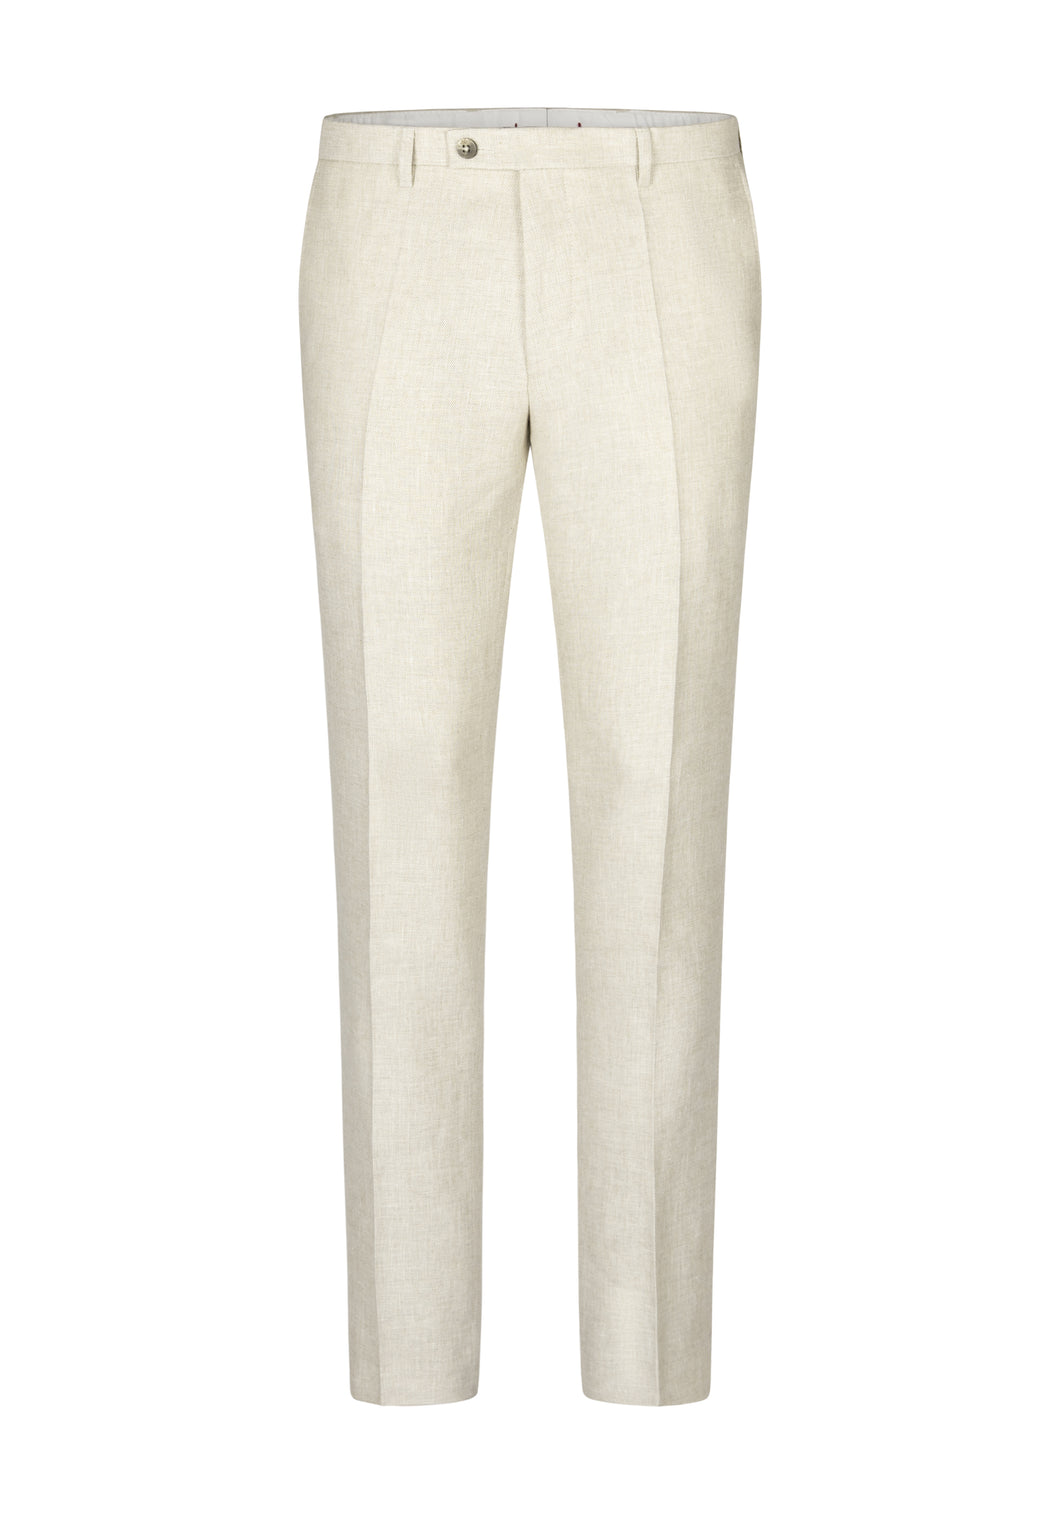 ROY ROBSON Slim Fit Linen and Cotton Trousers in Light Beige 08106 210